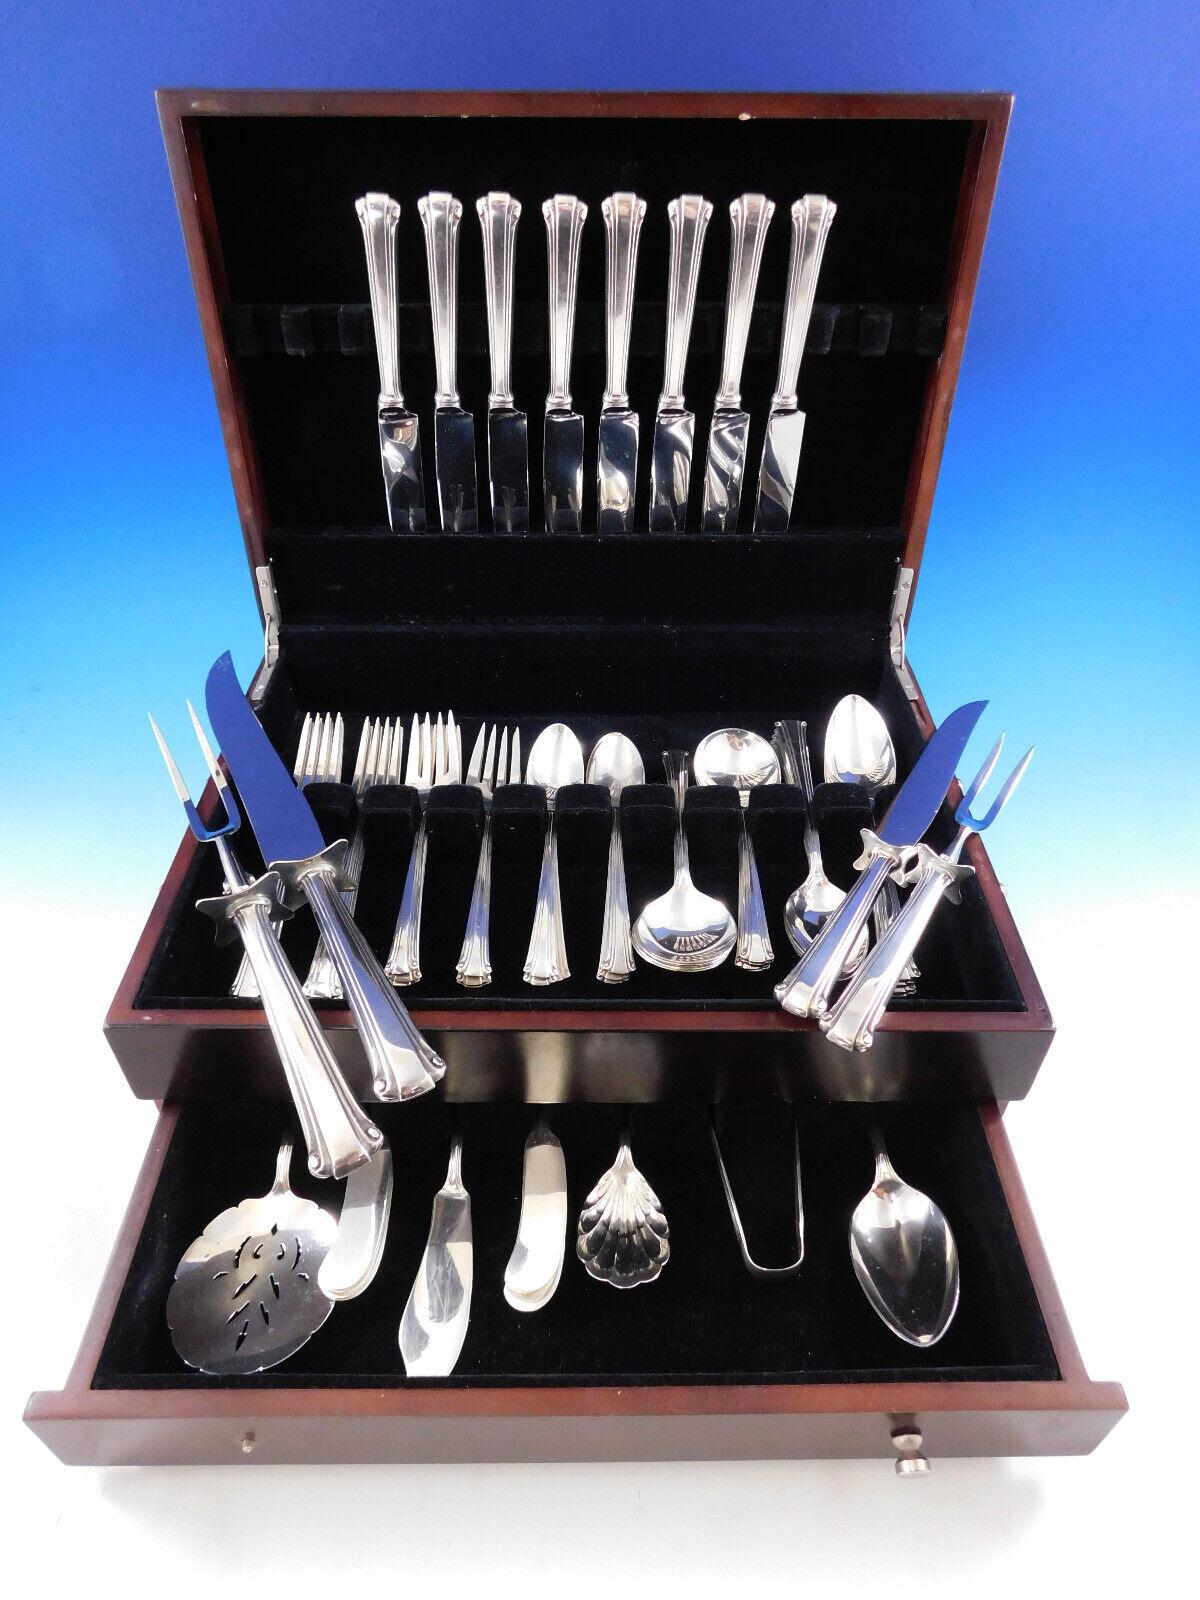 Cotillion by Reed & Barton sterling silver Flatware set - 65 pieces. This set includes:

8 Regular Knives, 9